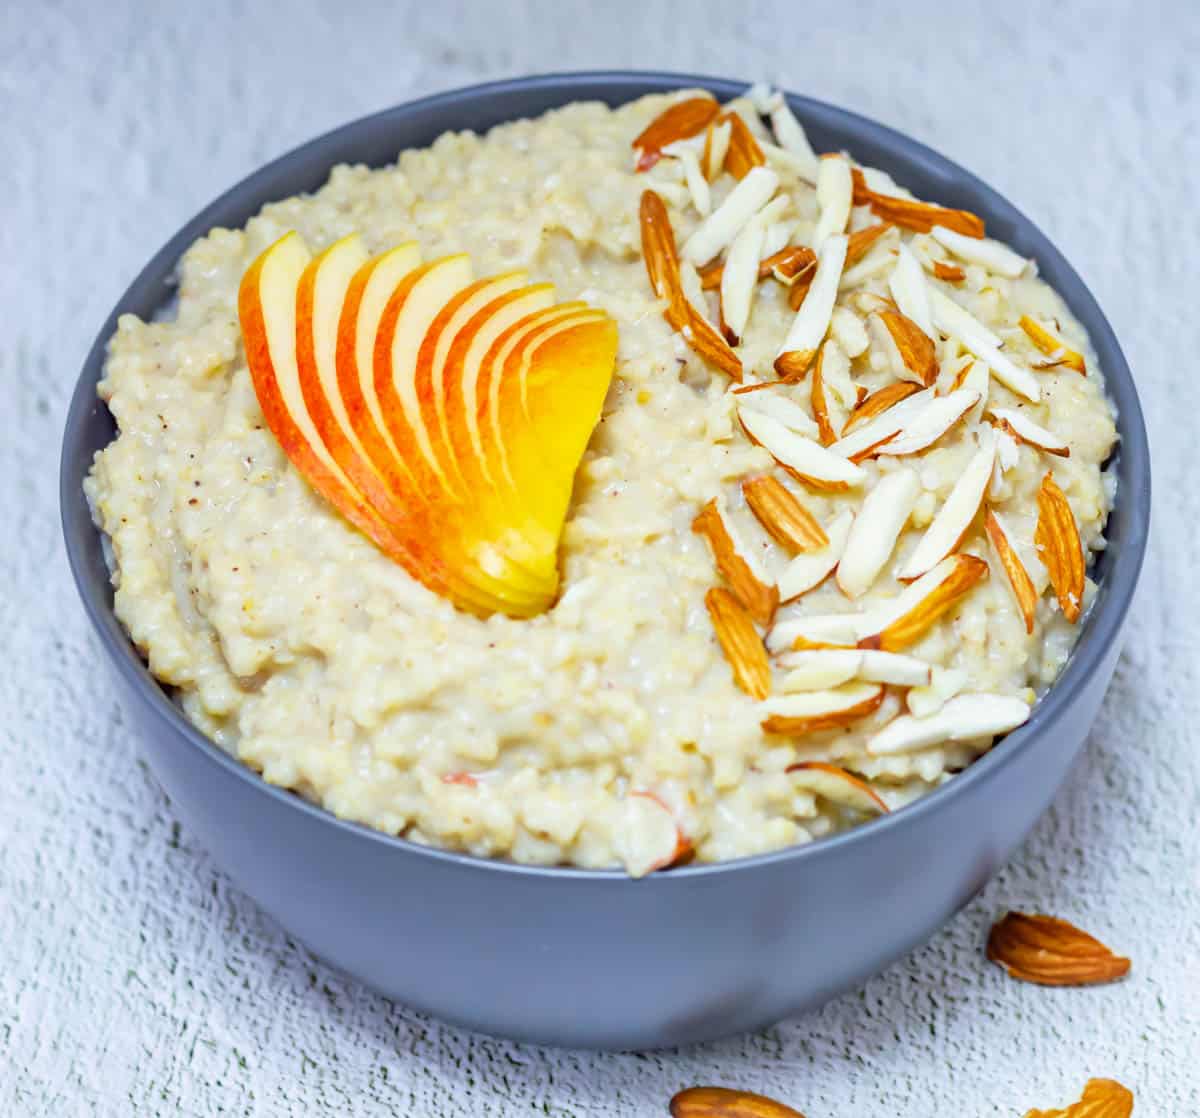 millet porridge in a grey bowl placed on a tile with almond slices next to the bowl.